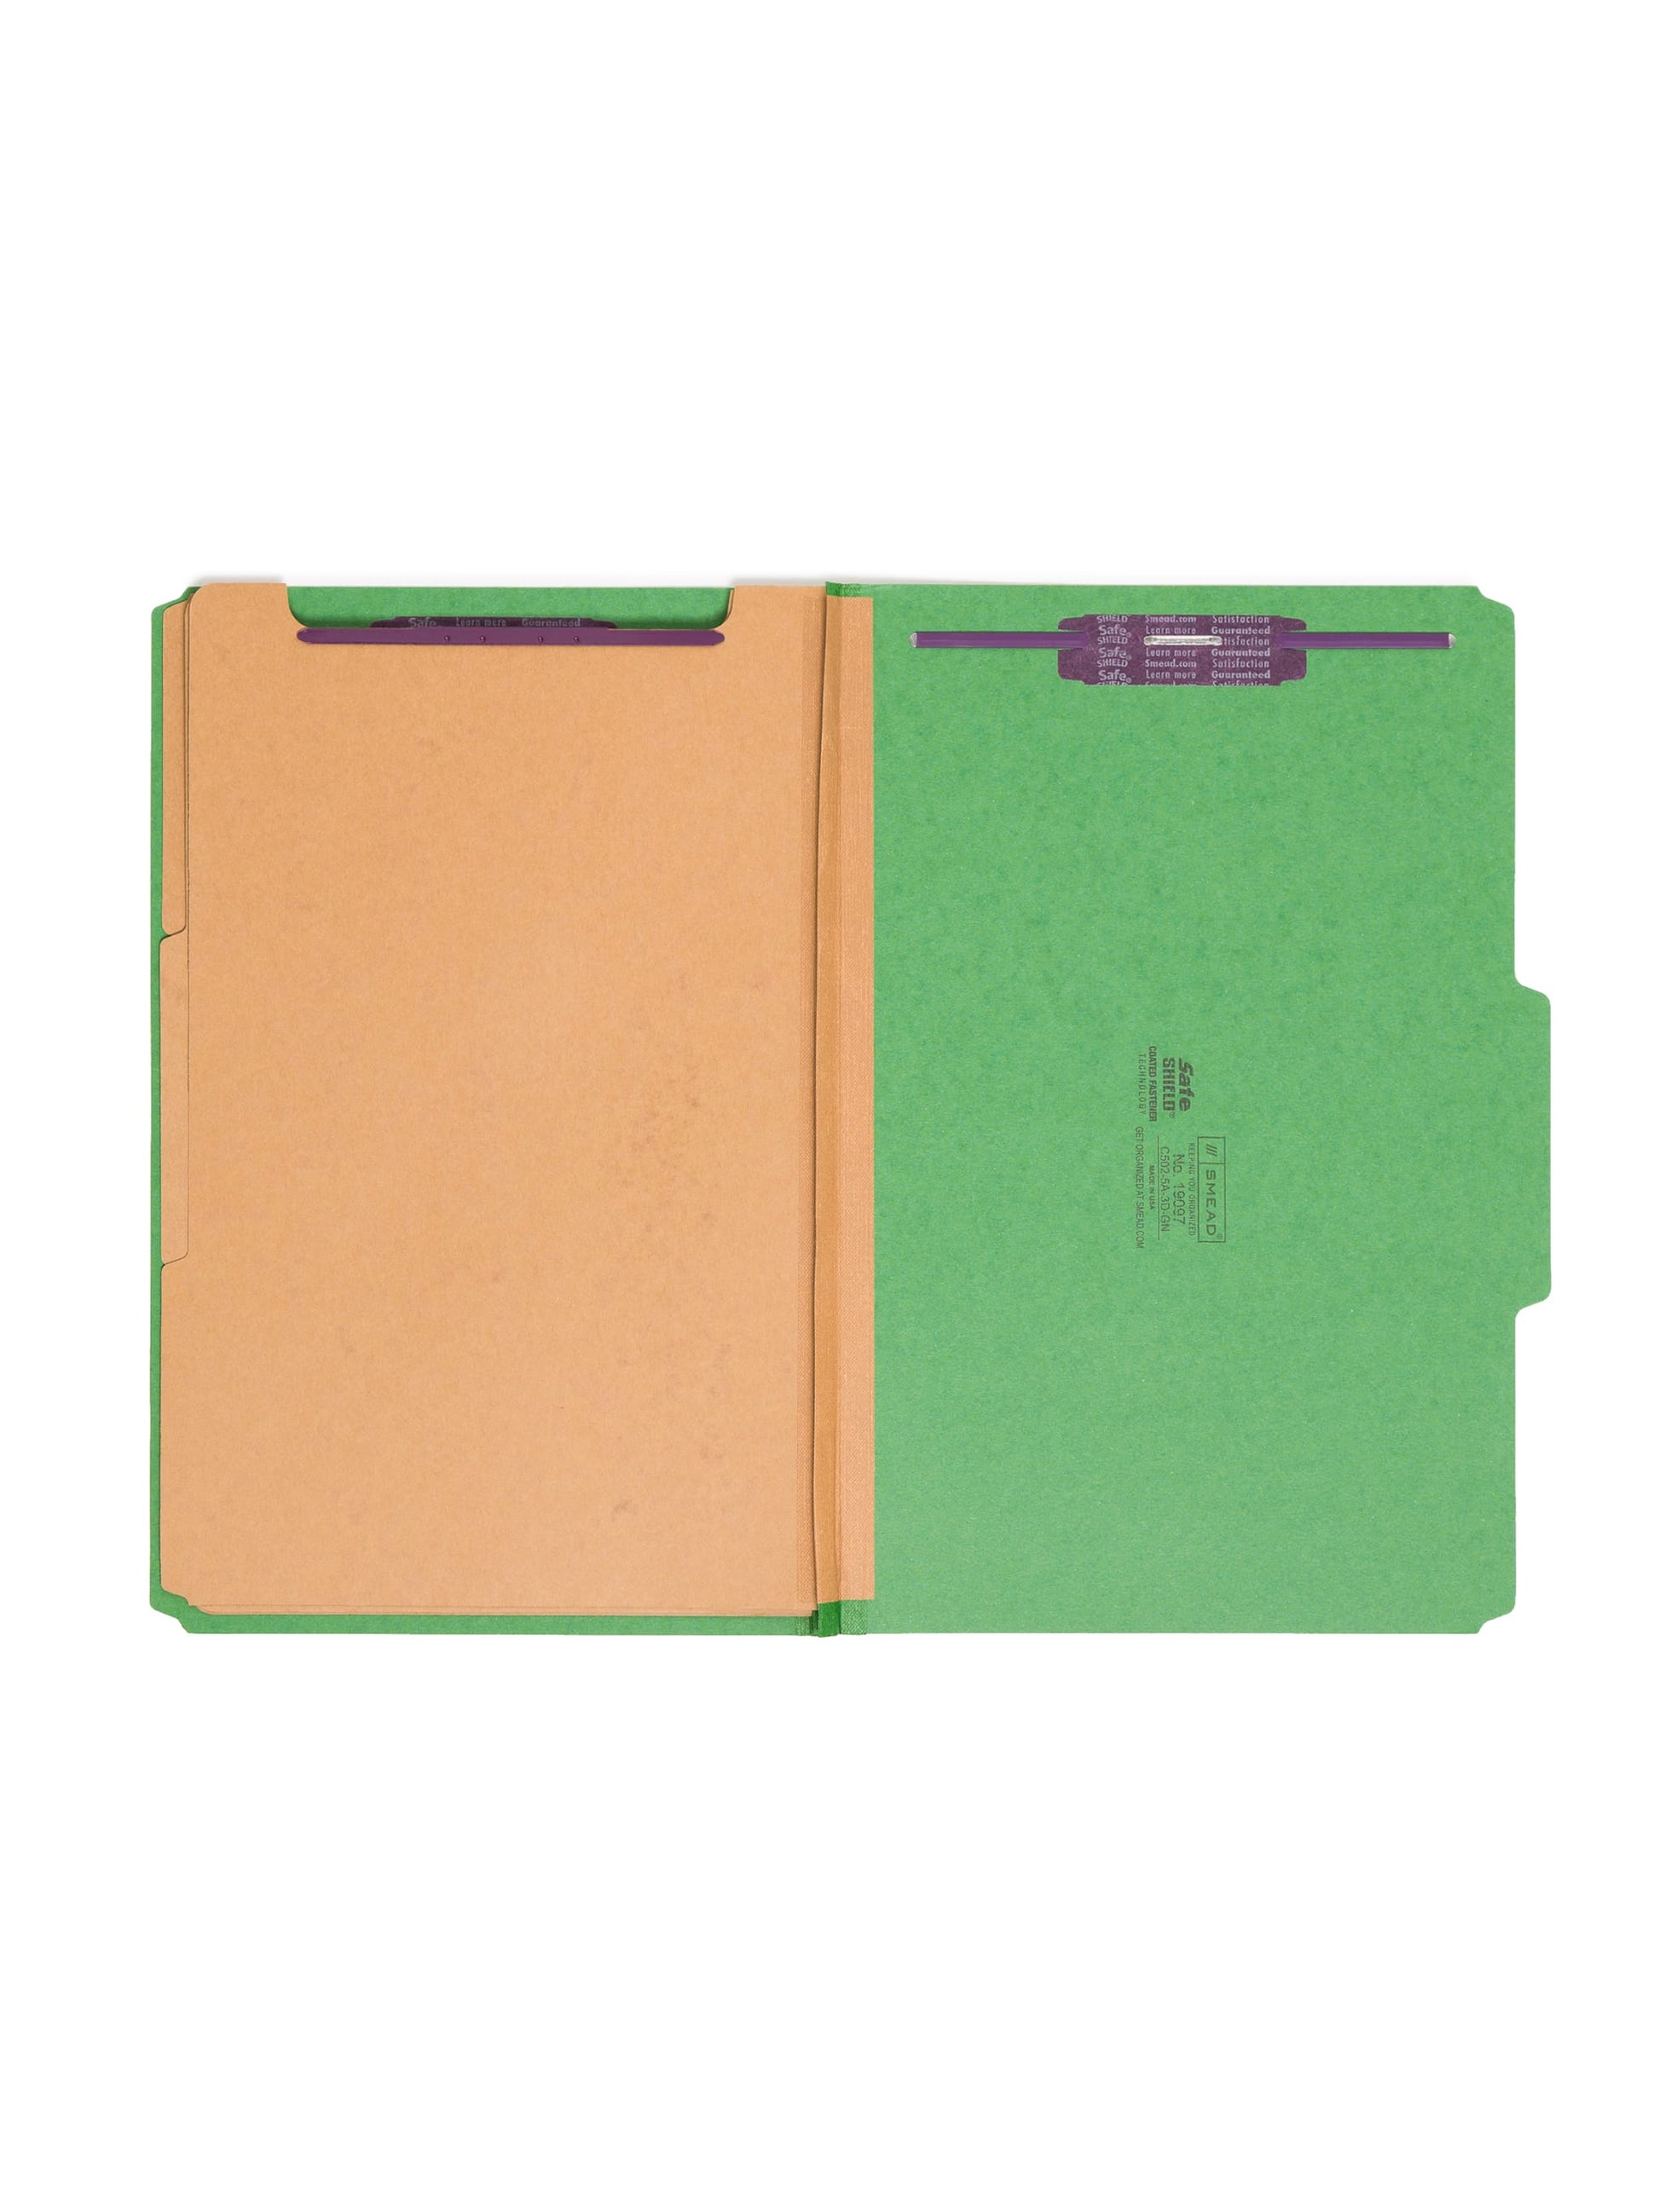 SafeSHIELD® Pressboard Classification File Folders, 3 Dividers, 3 inch Expansion, 2/5-Cut Tab, Green Color, Legal Size, Set of 0, 30086486190979